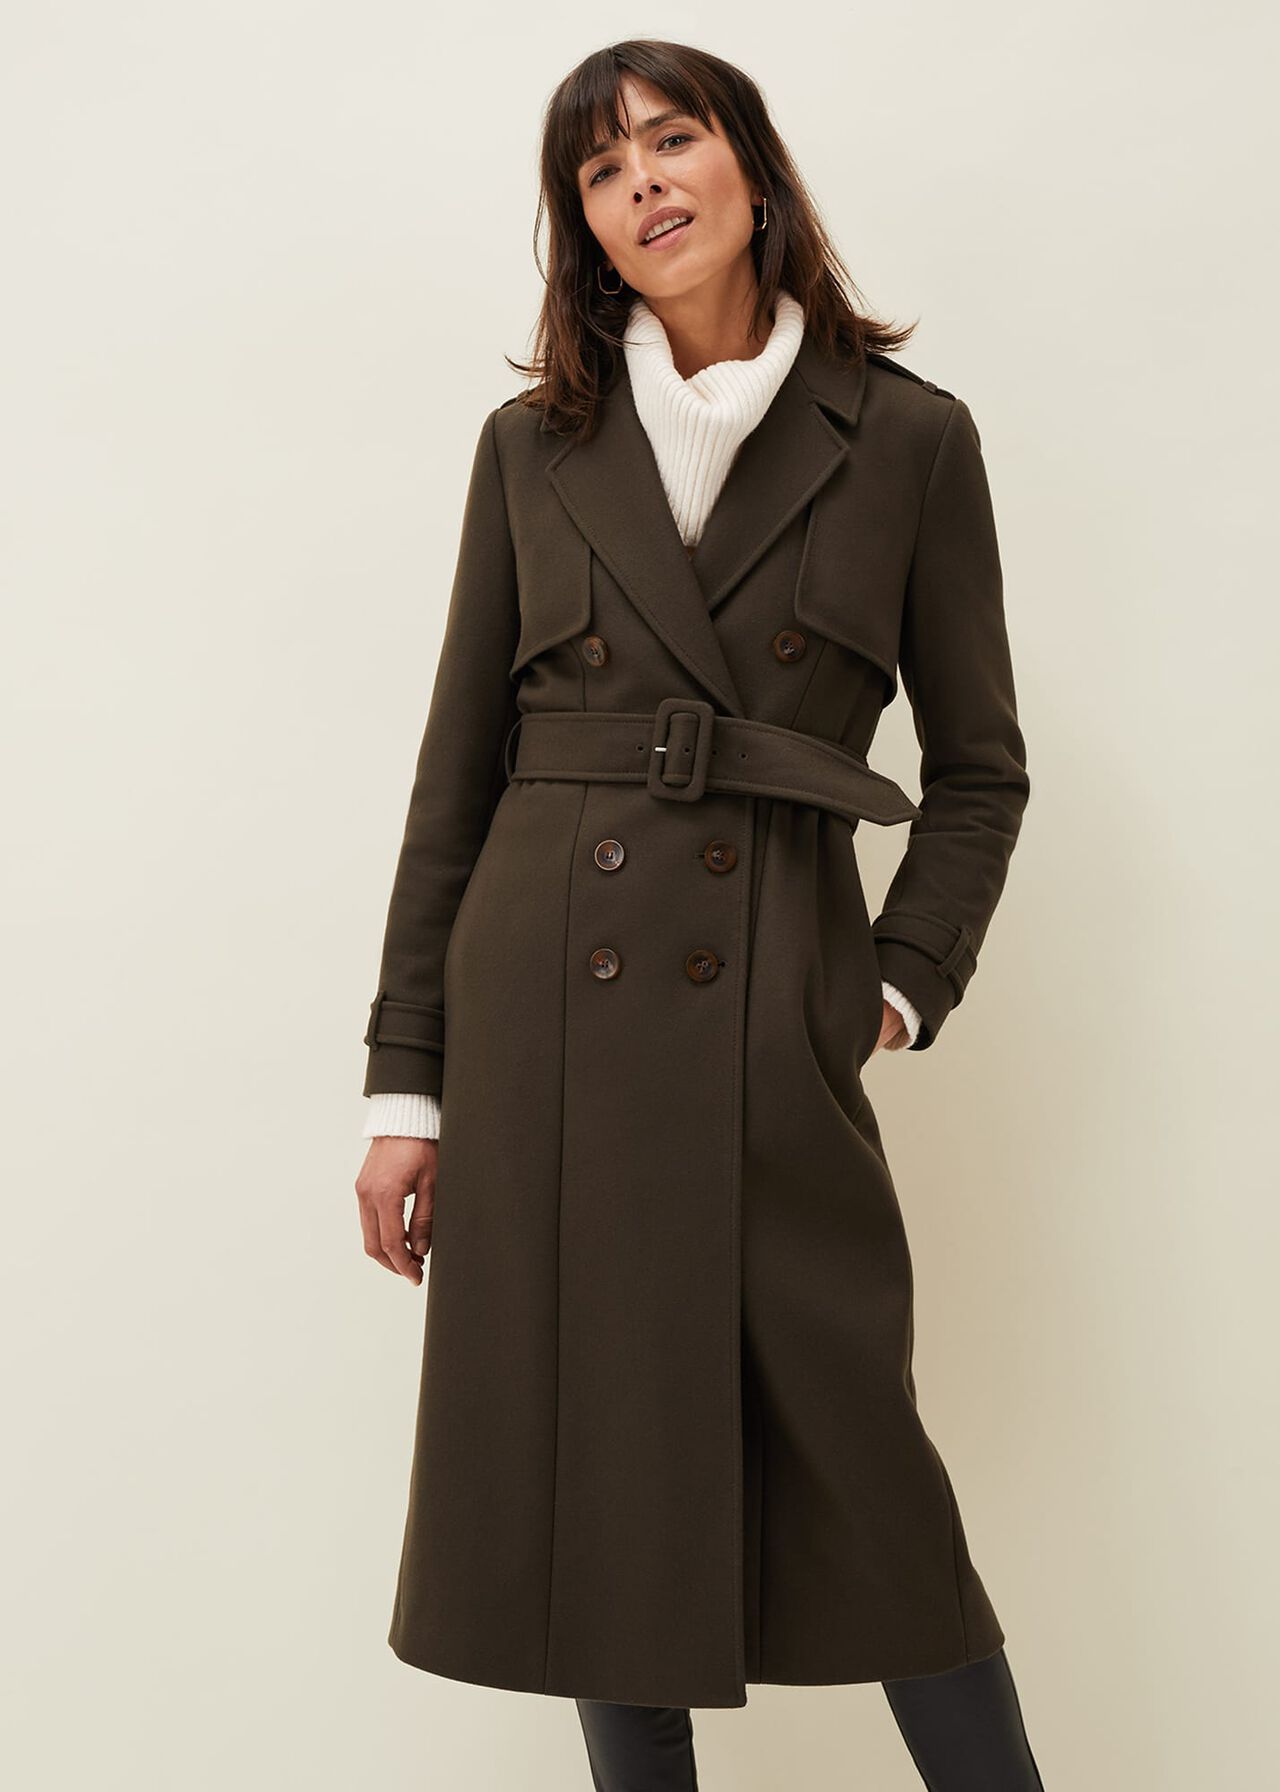 Imie Wool Trench Coat | Phase Eight